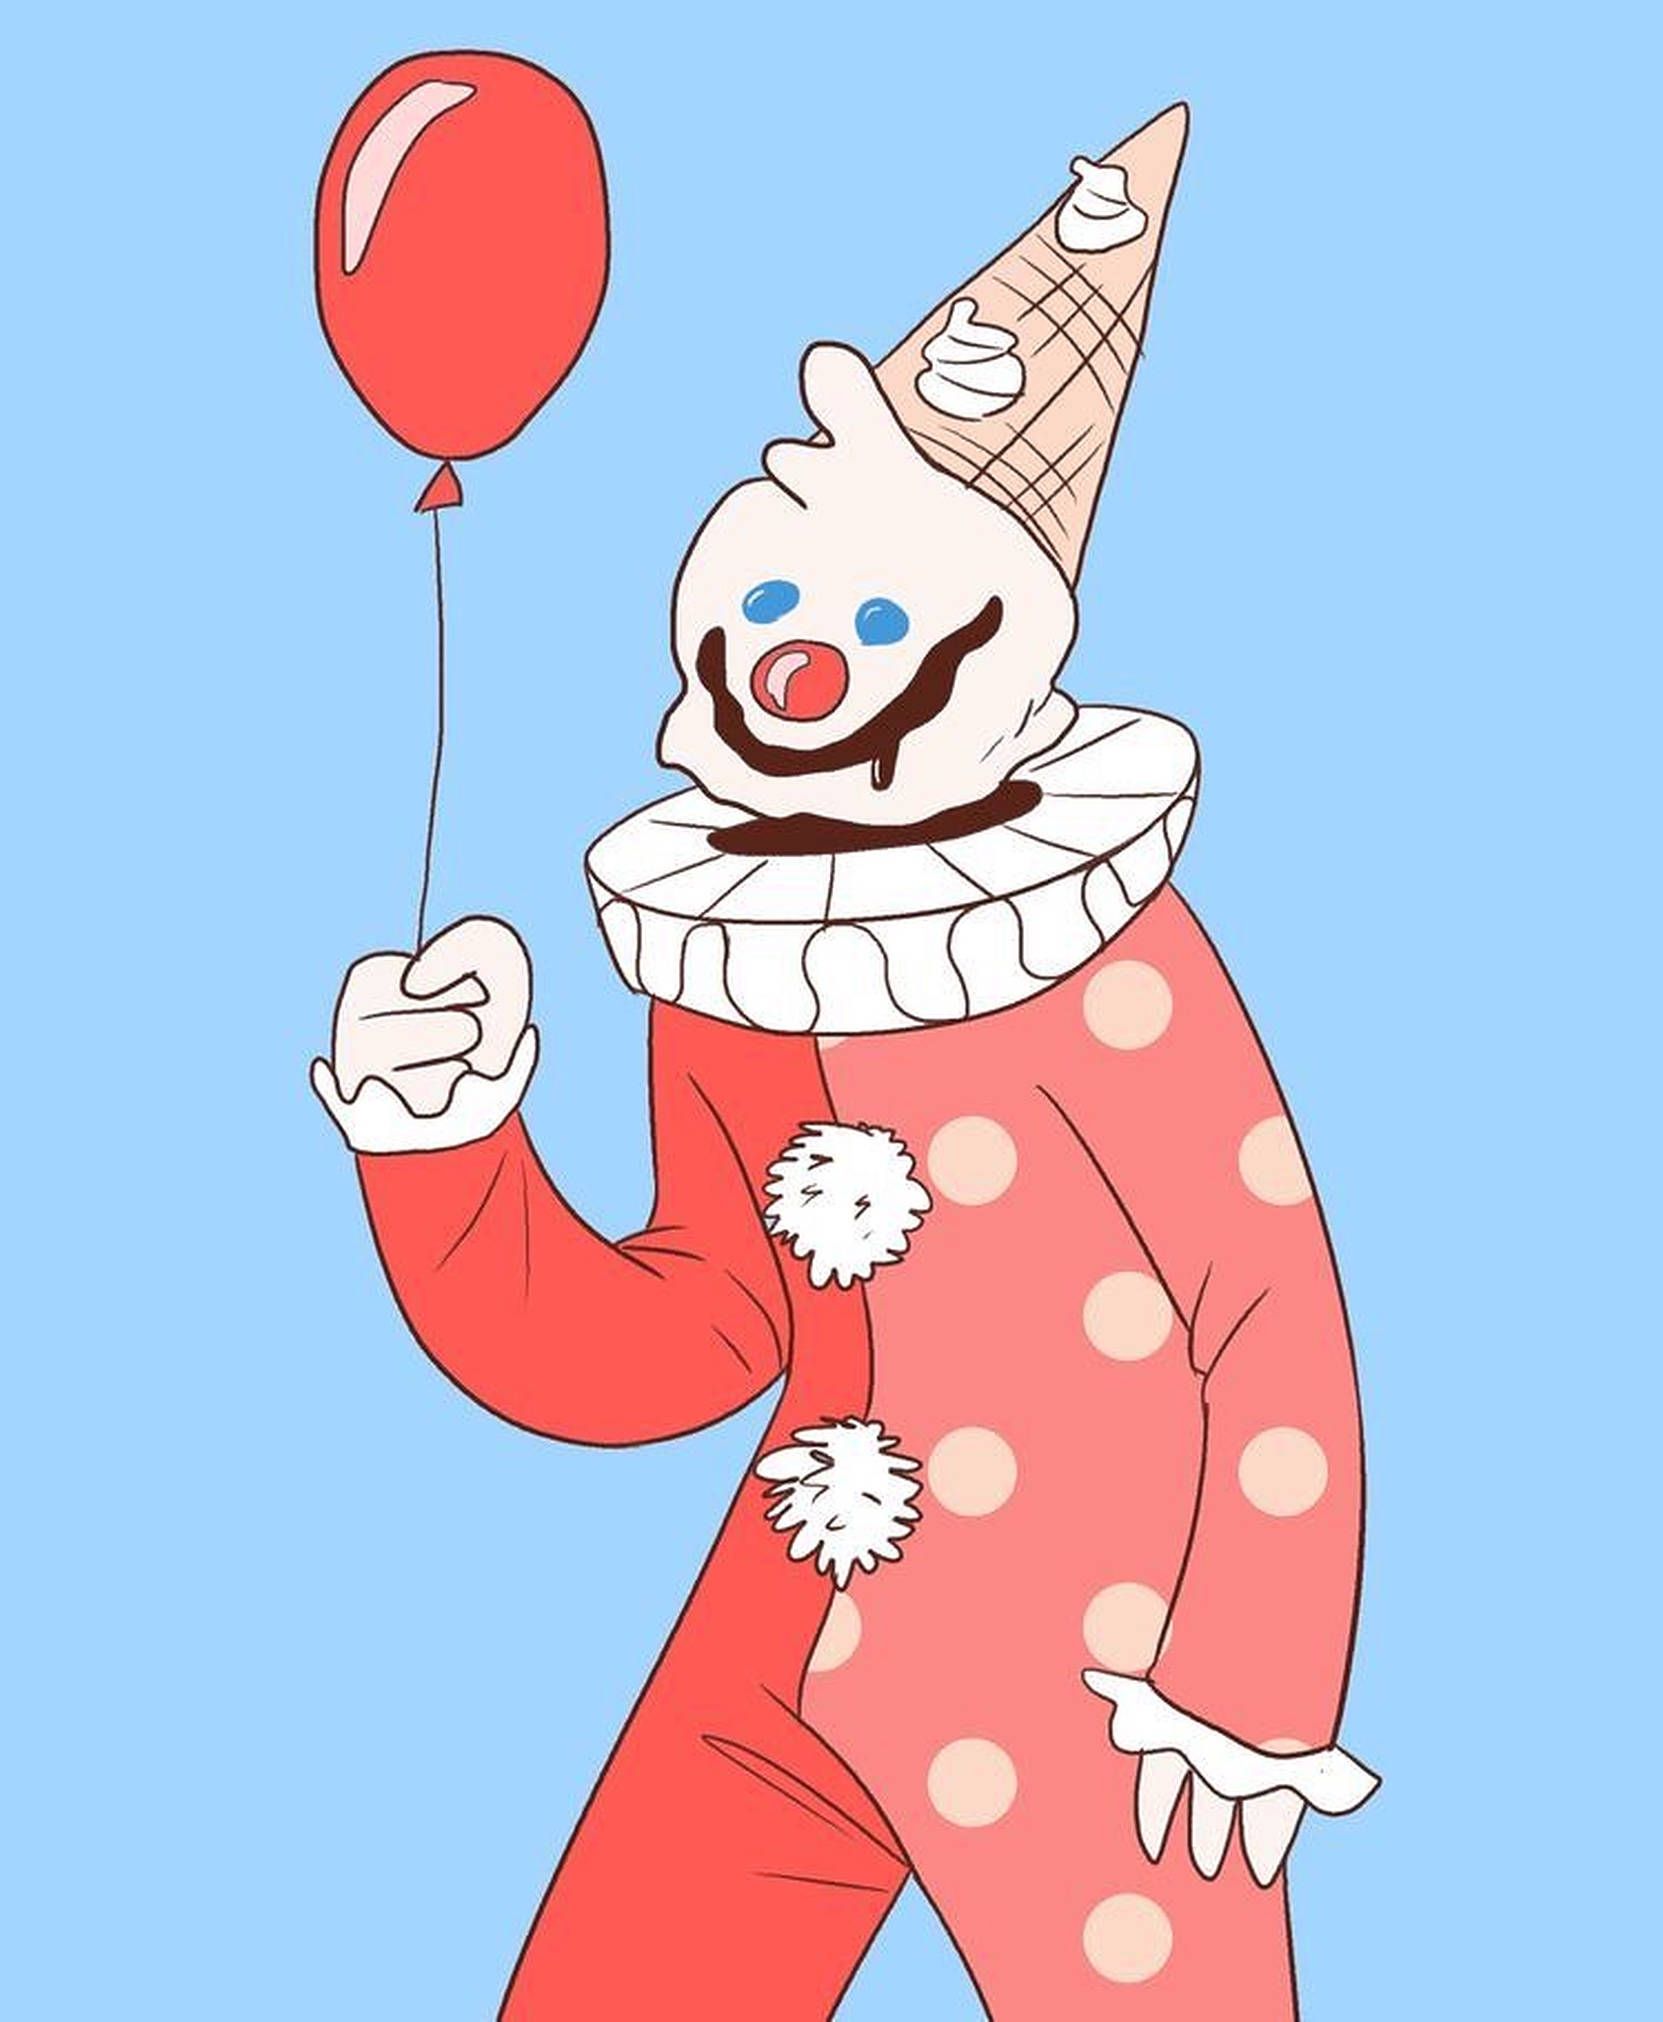 A clown holding up balloons and wearing an outfit - Clown, clowncore